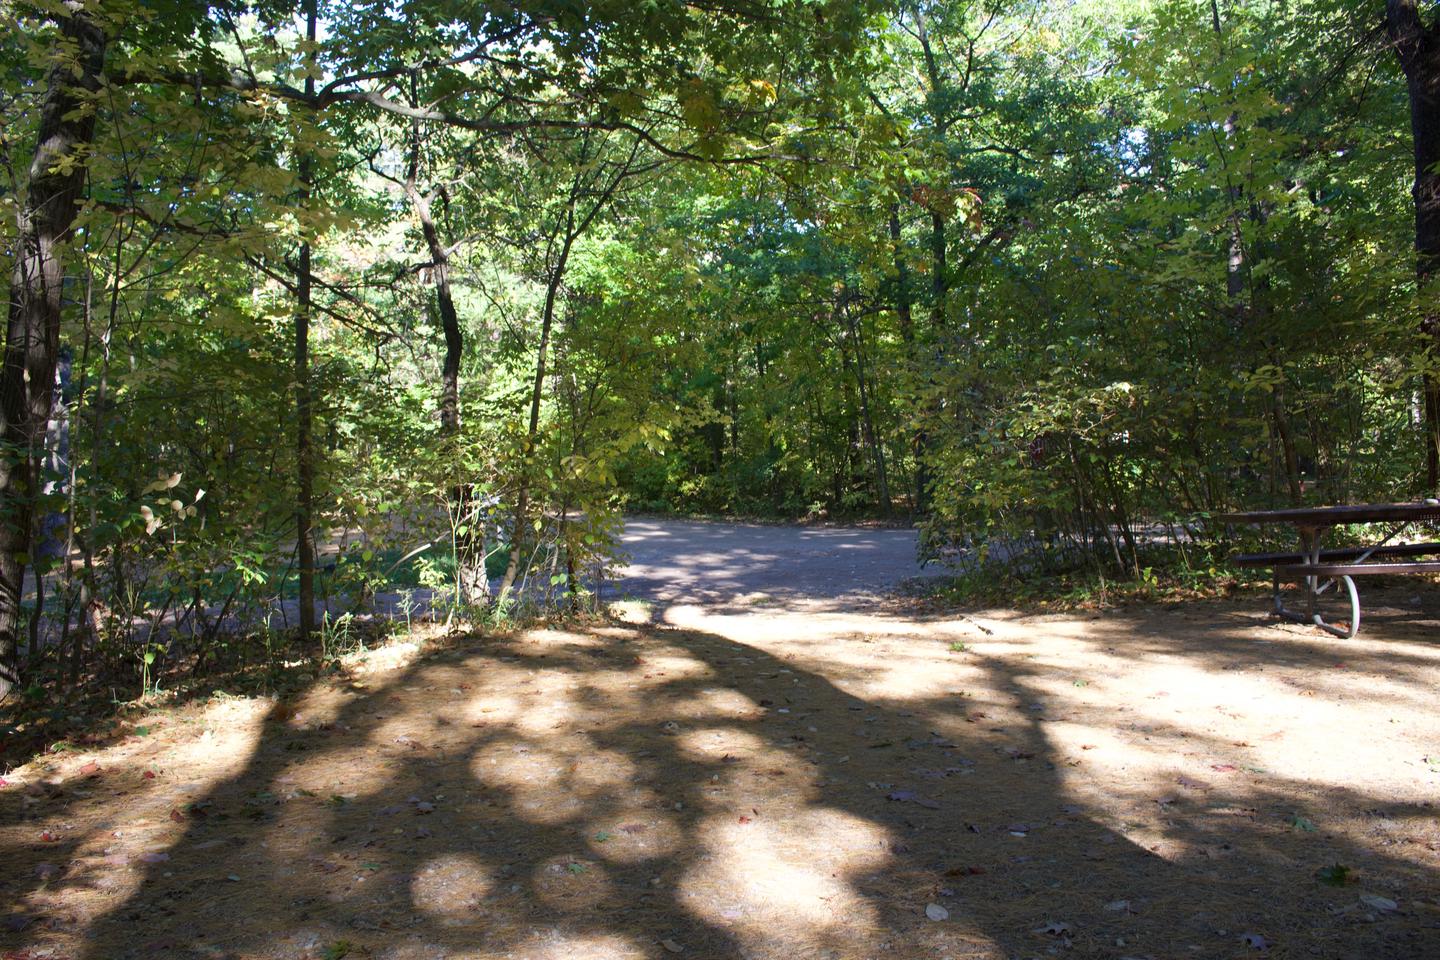 Campsite #89, view from the site toward the road